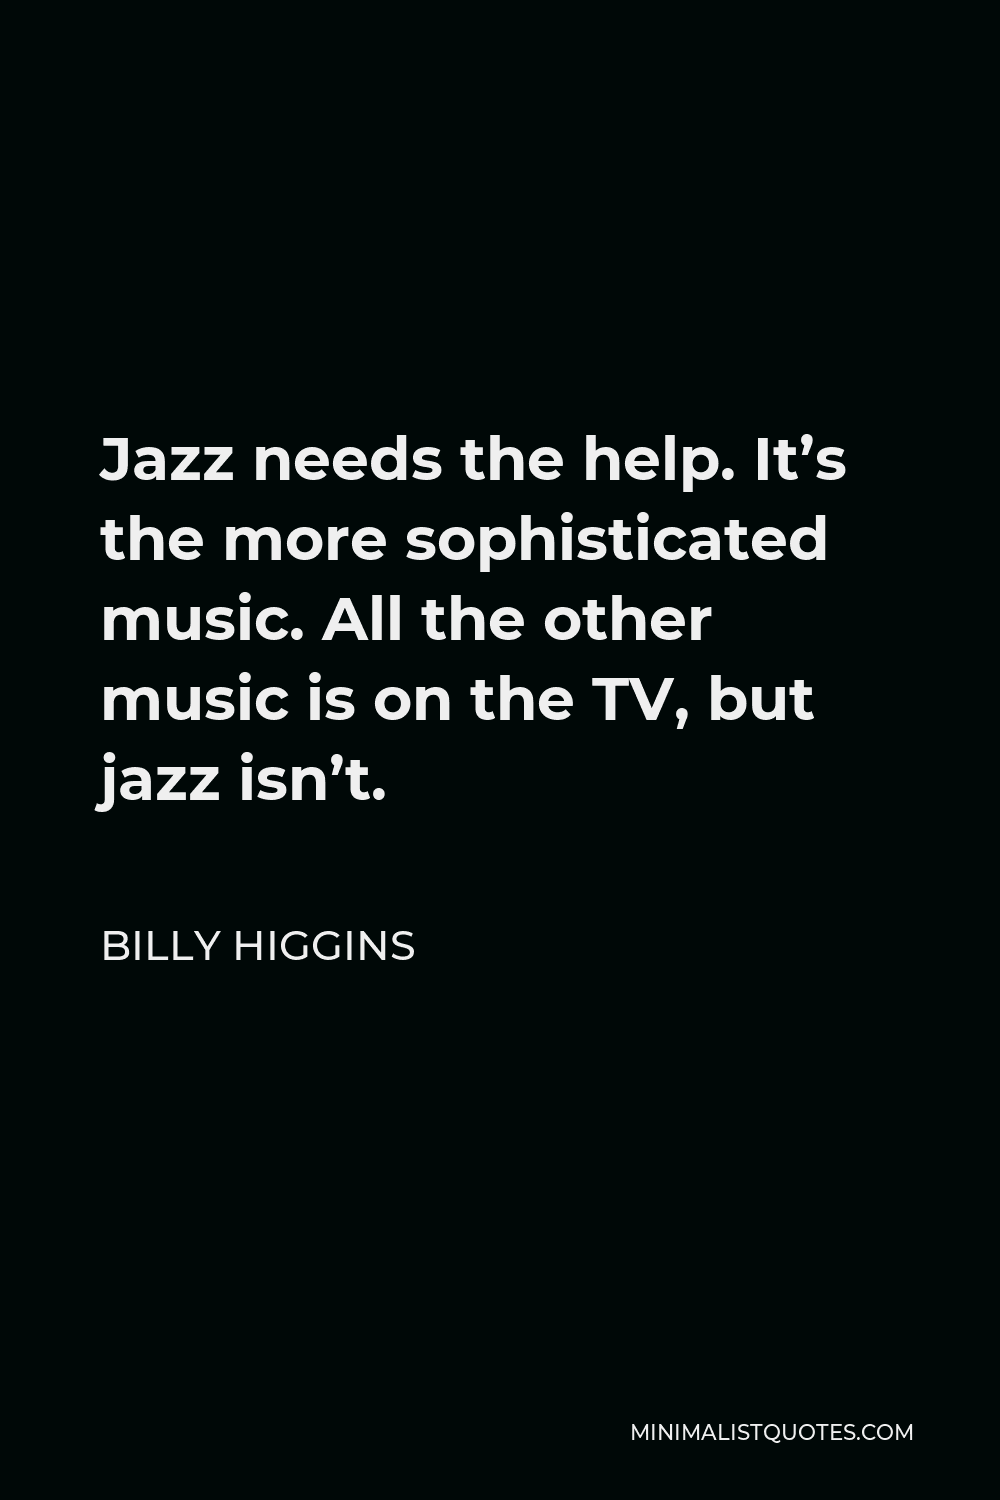 Billy Higgins Quote - Jazz needs the help. It’s the more sophisticated music. All the other music is on the TV, but jazz isn’t.